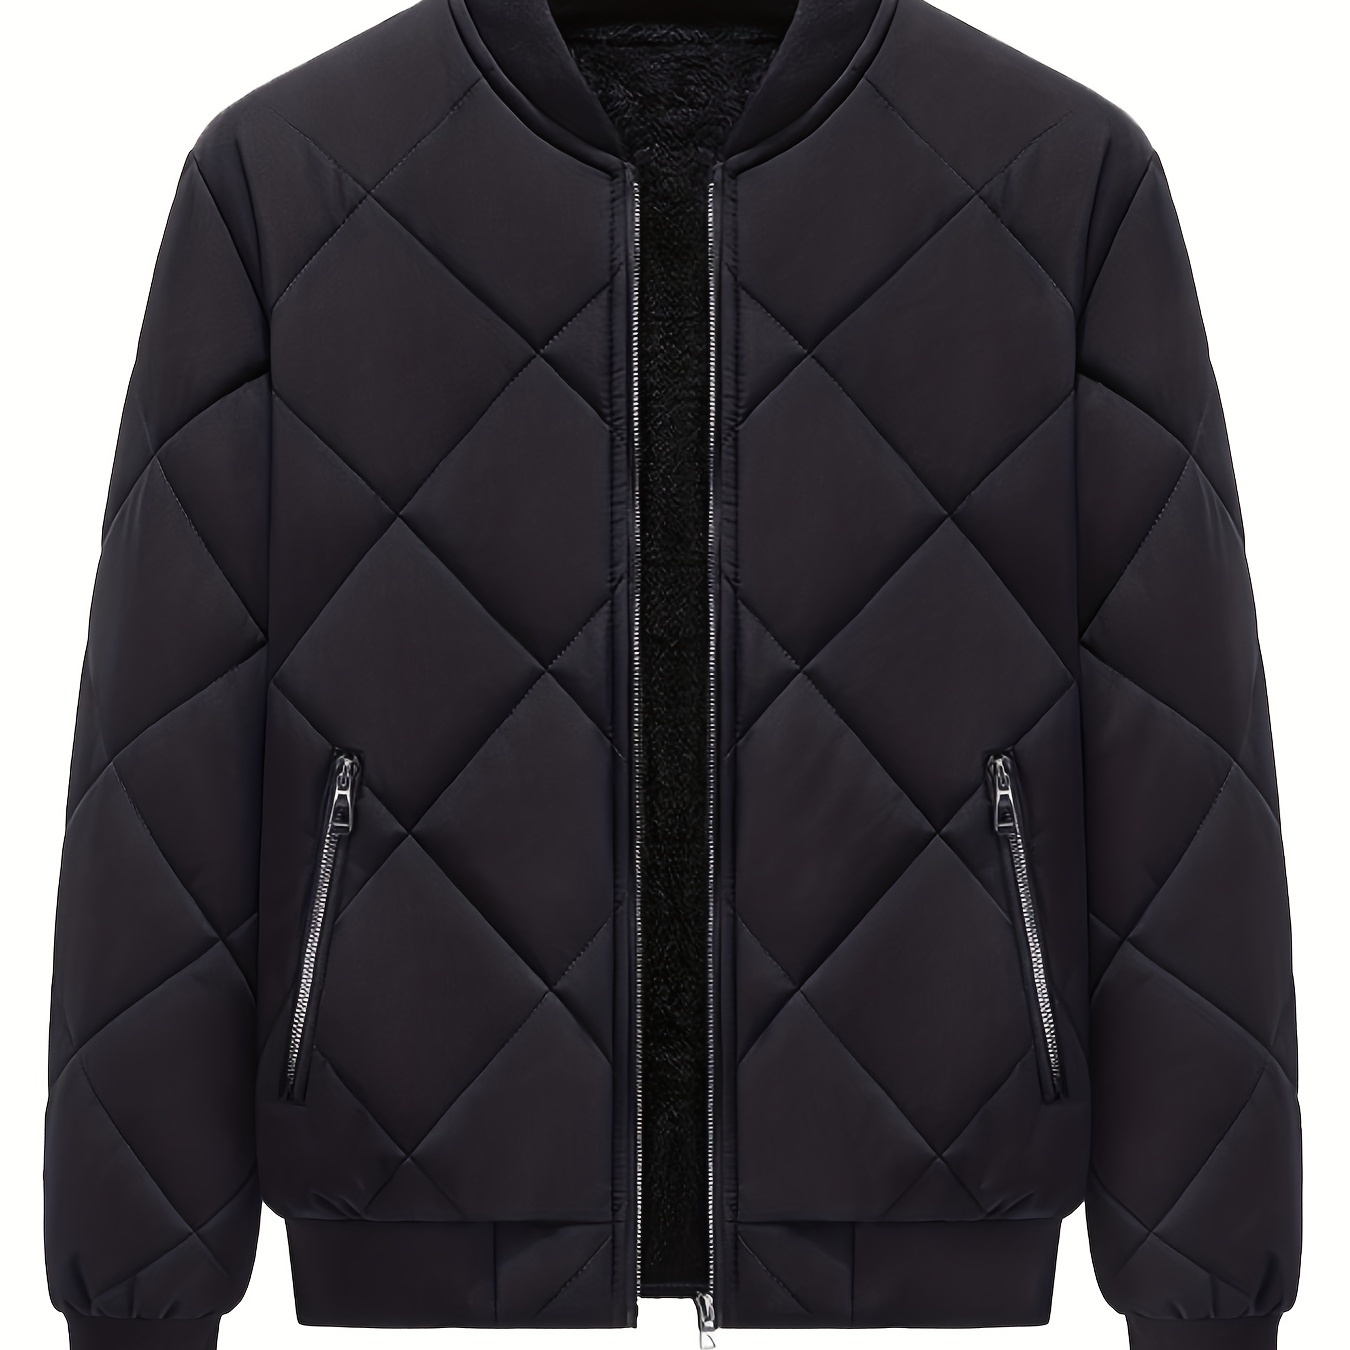 

Warm Fleece Thickened Jacket, Men's Casual Baseball Collar Zip Up Quilted Jacket For Fall Winter